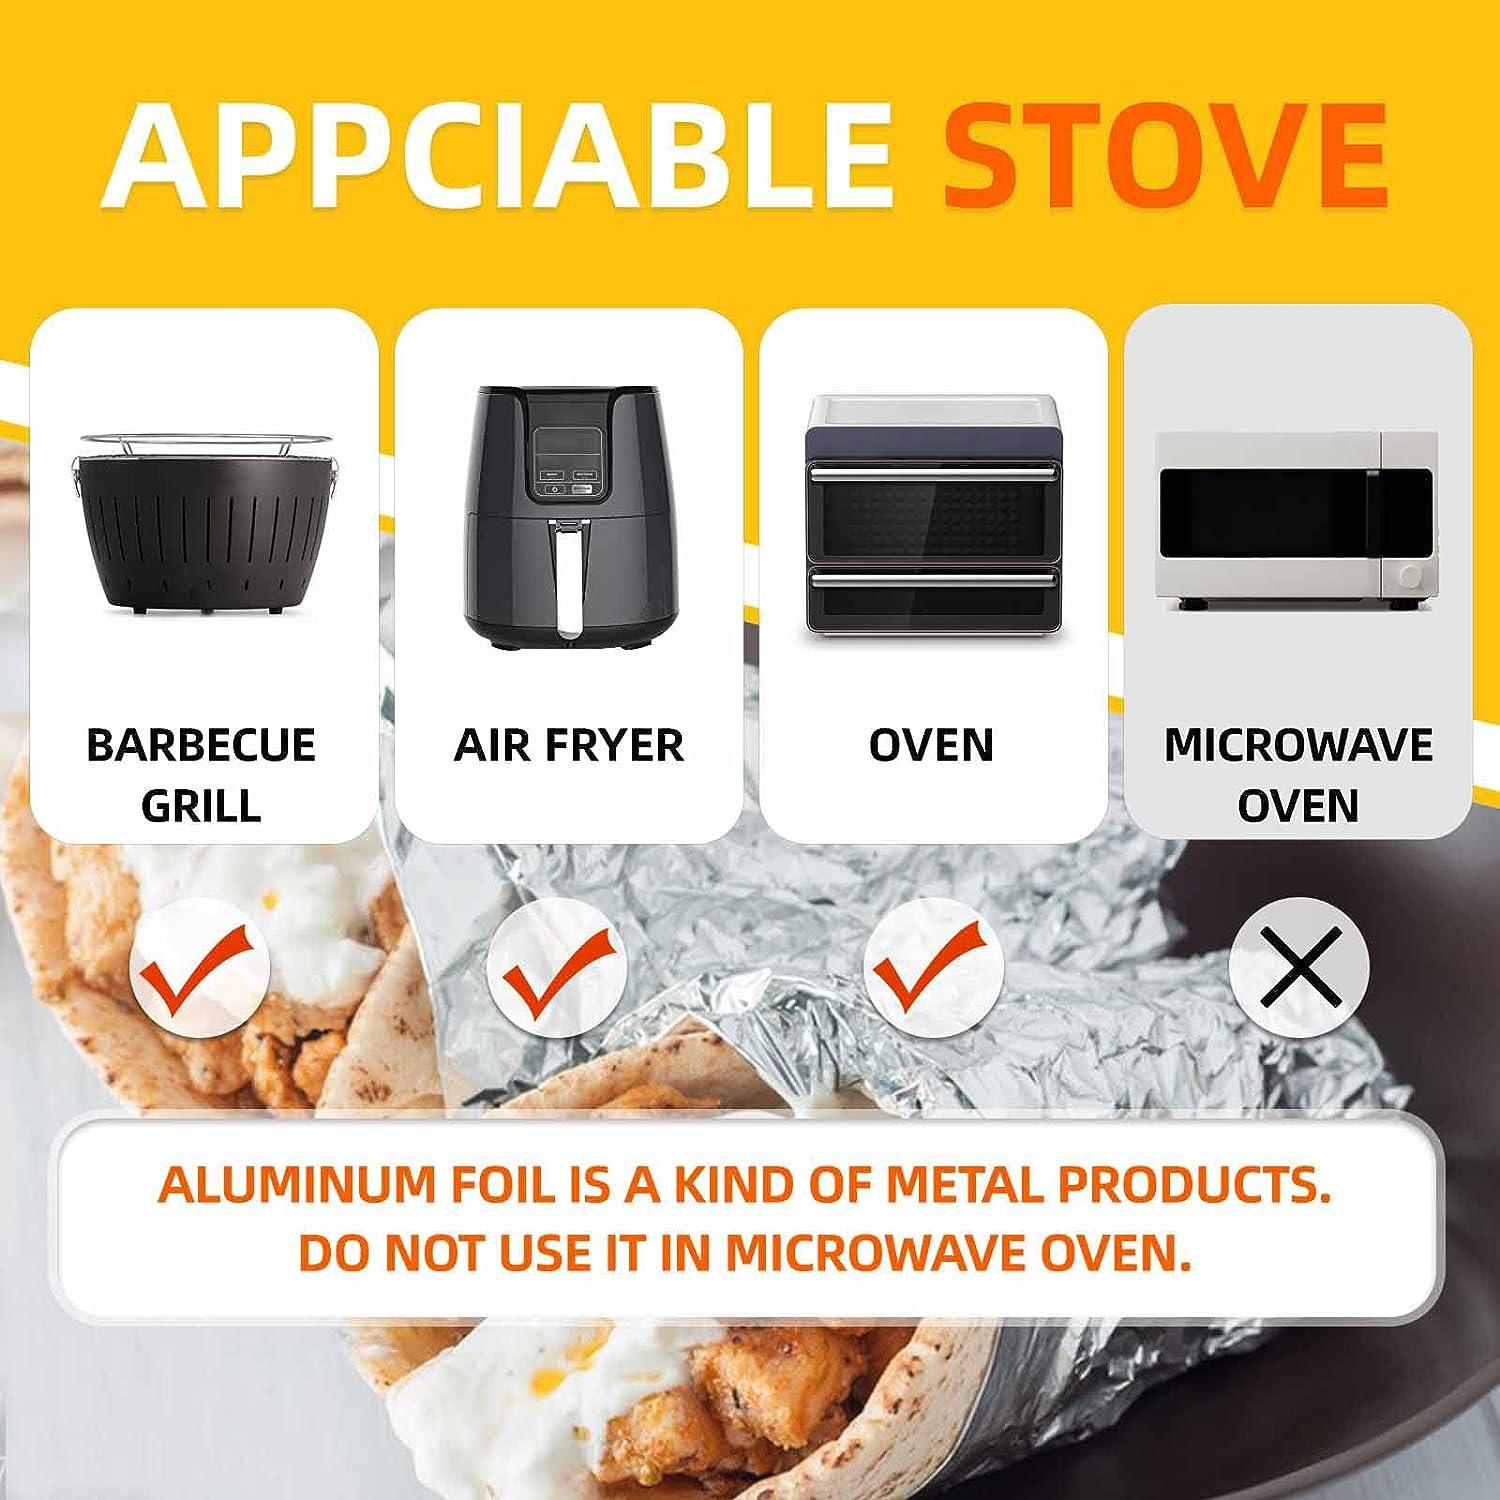 8x8 Aluminum Foil Pans with Lids - 30 Pack Square Disposable Heavy Duty  Aluminum Baking with Covers - Disposable Baking Pans for Air Fryer, Oven